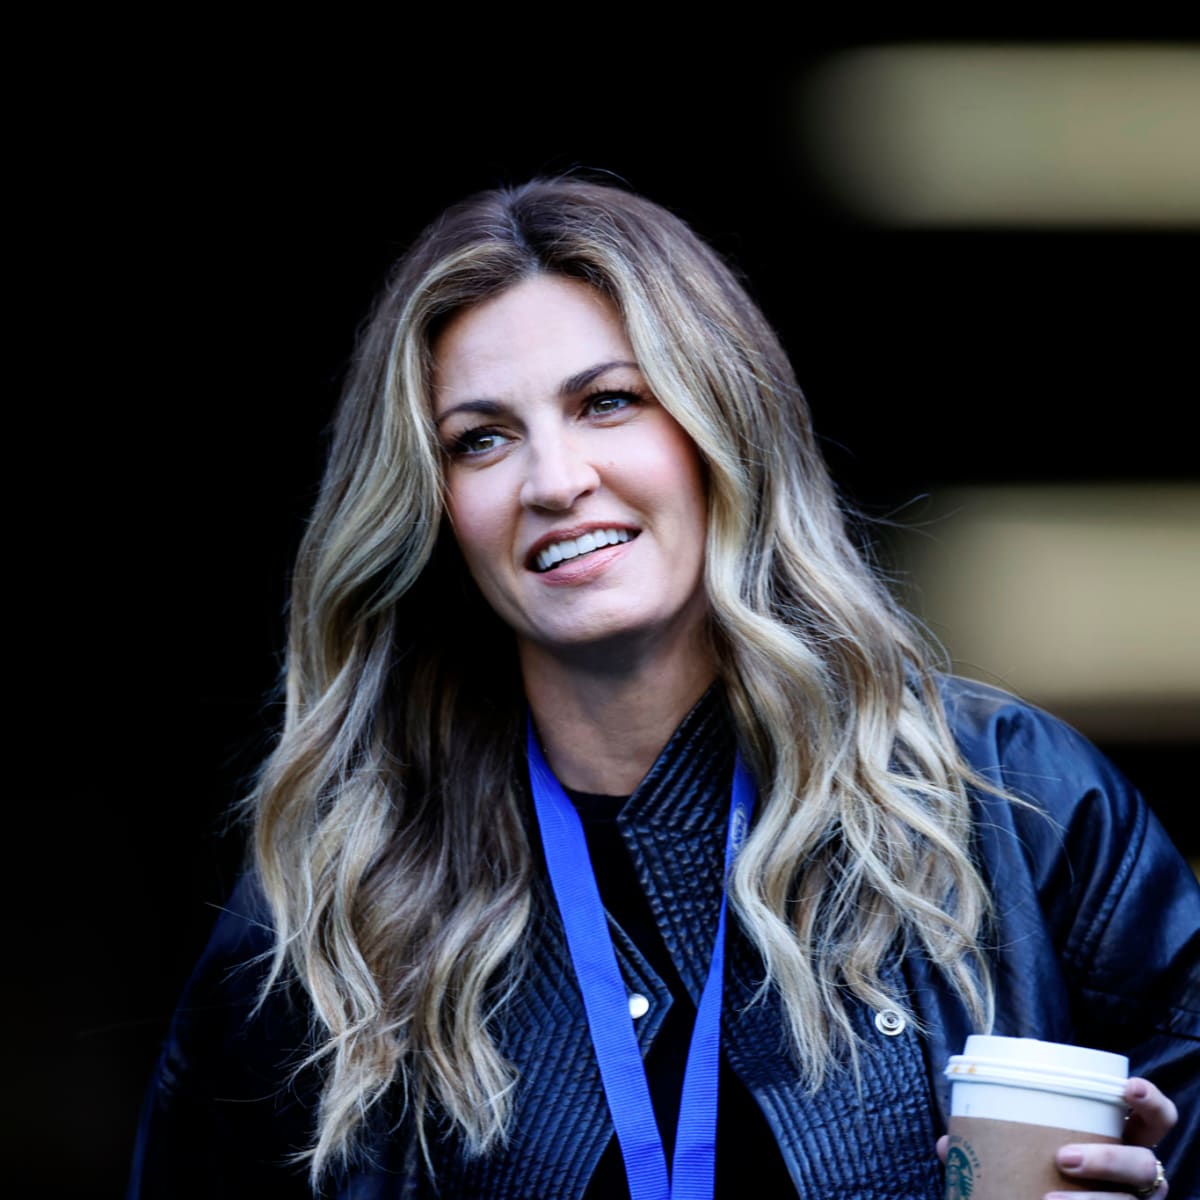 NFL World Reacts To Erin Andrews' Cowboys Photo - The Spun: What's